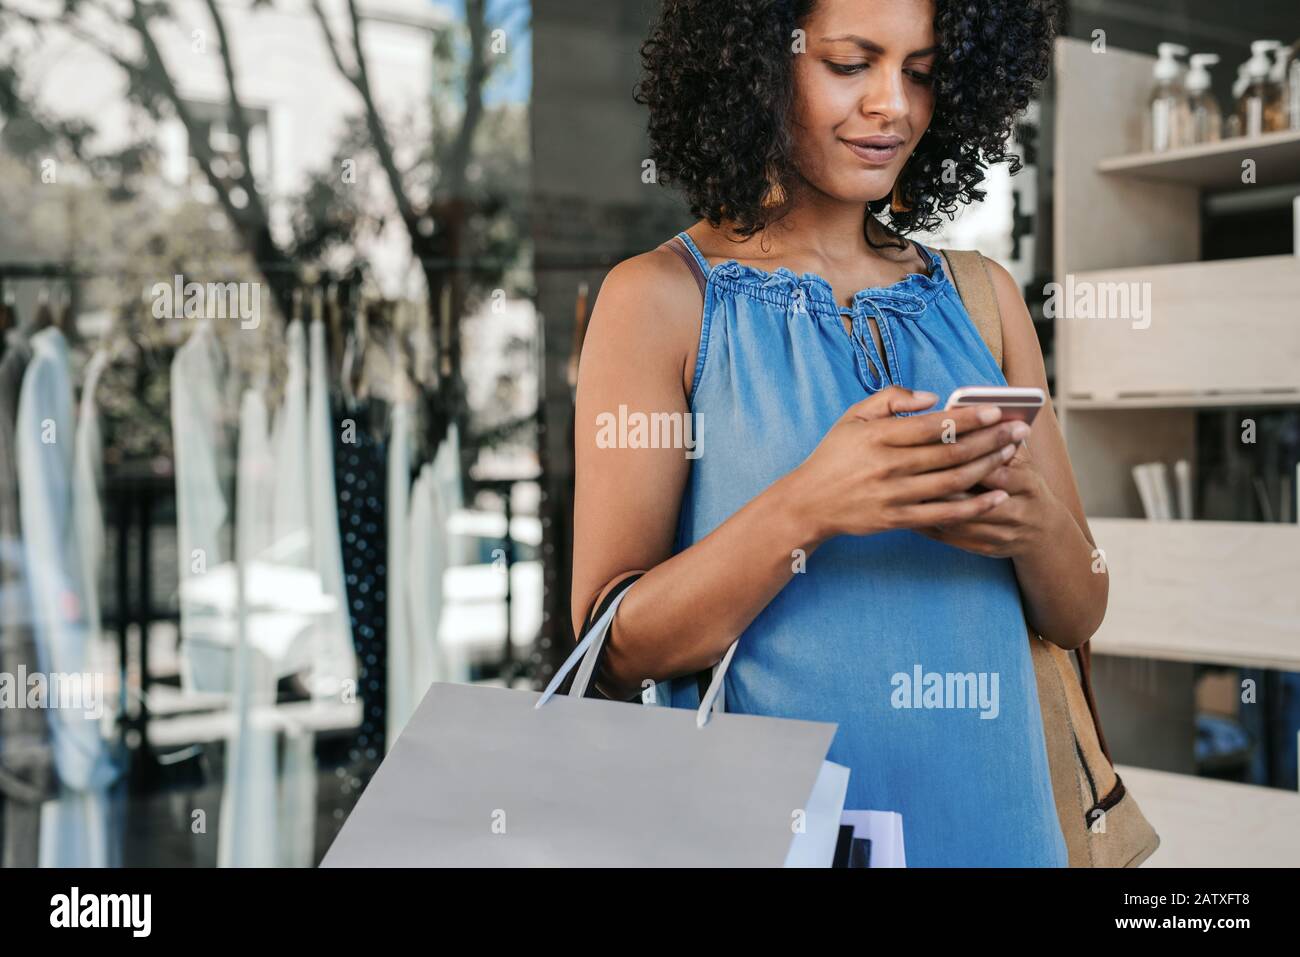 Young woman sending a text message while out clothes shopping Stock Photo